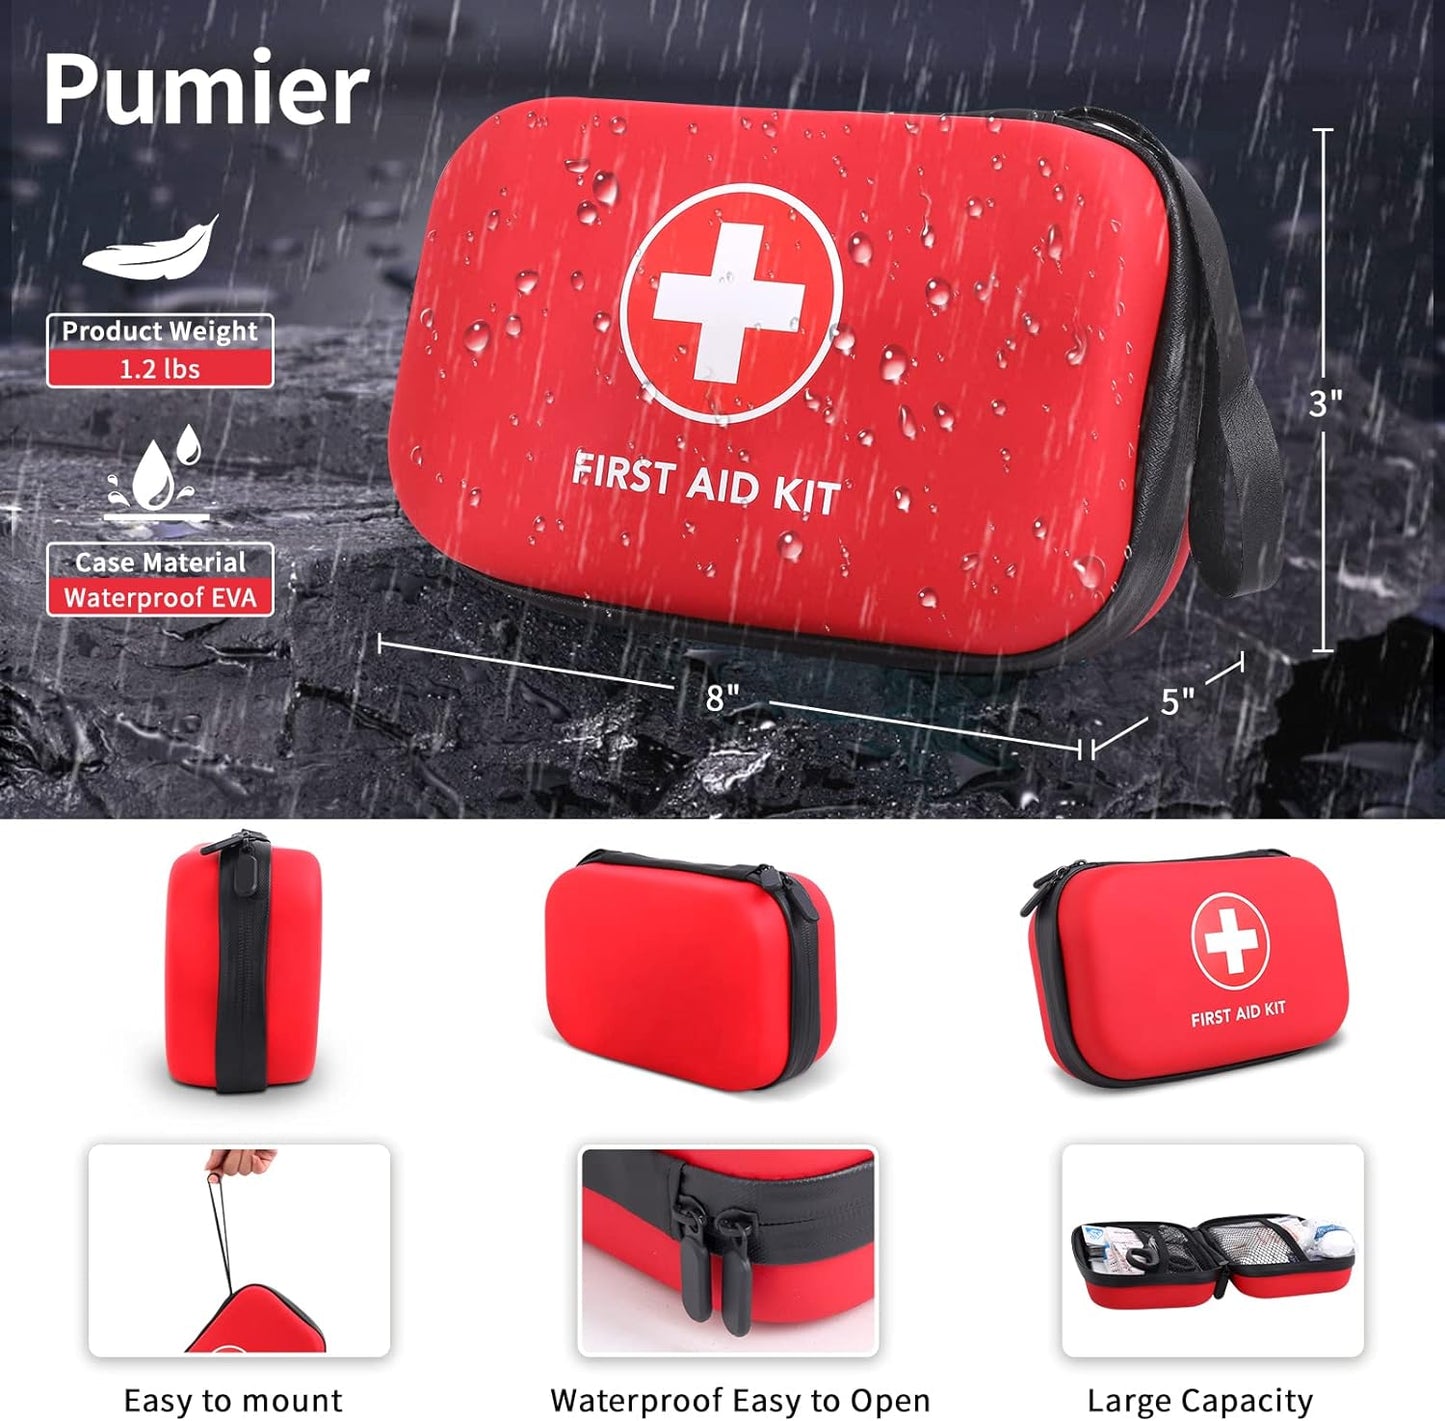 Home Car First Aid Kit Camping Essentials 263pcs Waterproof Zippers is Ideal for Travel, Office, Boat, Sports, Businesses, Hiking, Emergency Survival